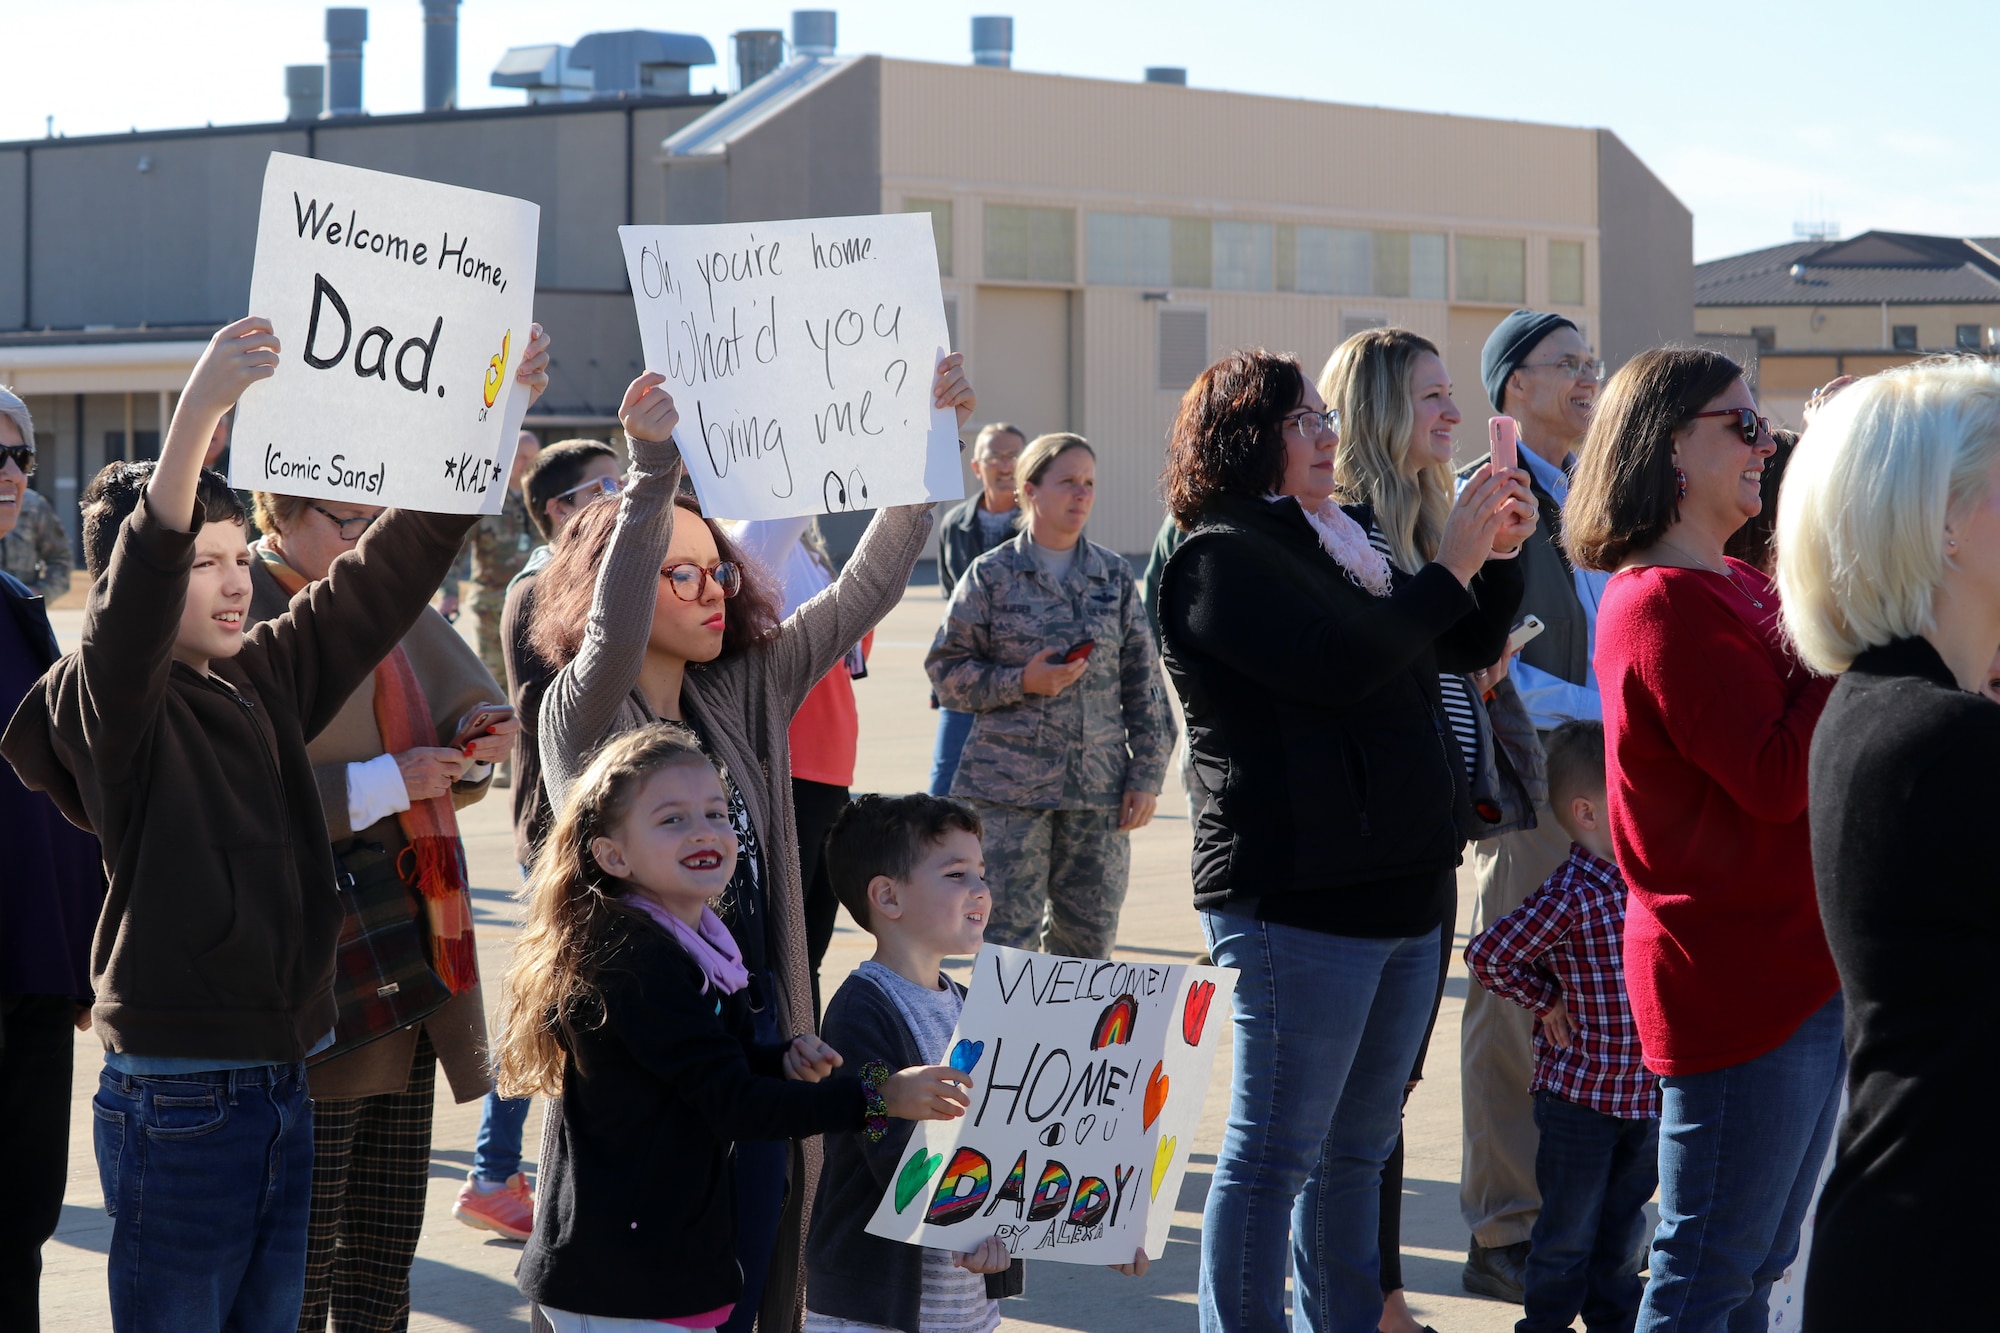 507th Air Refueling Wing families await the return of their deployed Airmen Nov. 25, 2019, at Tinker Air Force Base, Oklahoma. (U.S. Air Force photo by Senior Airman Mary Begy)